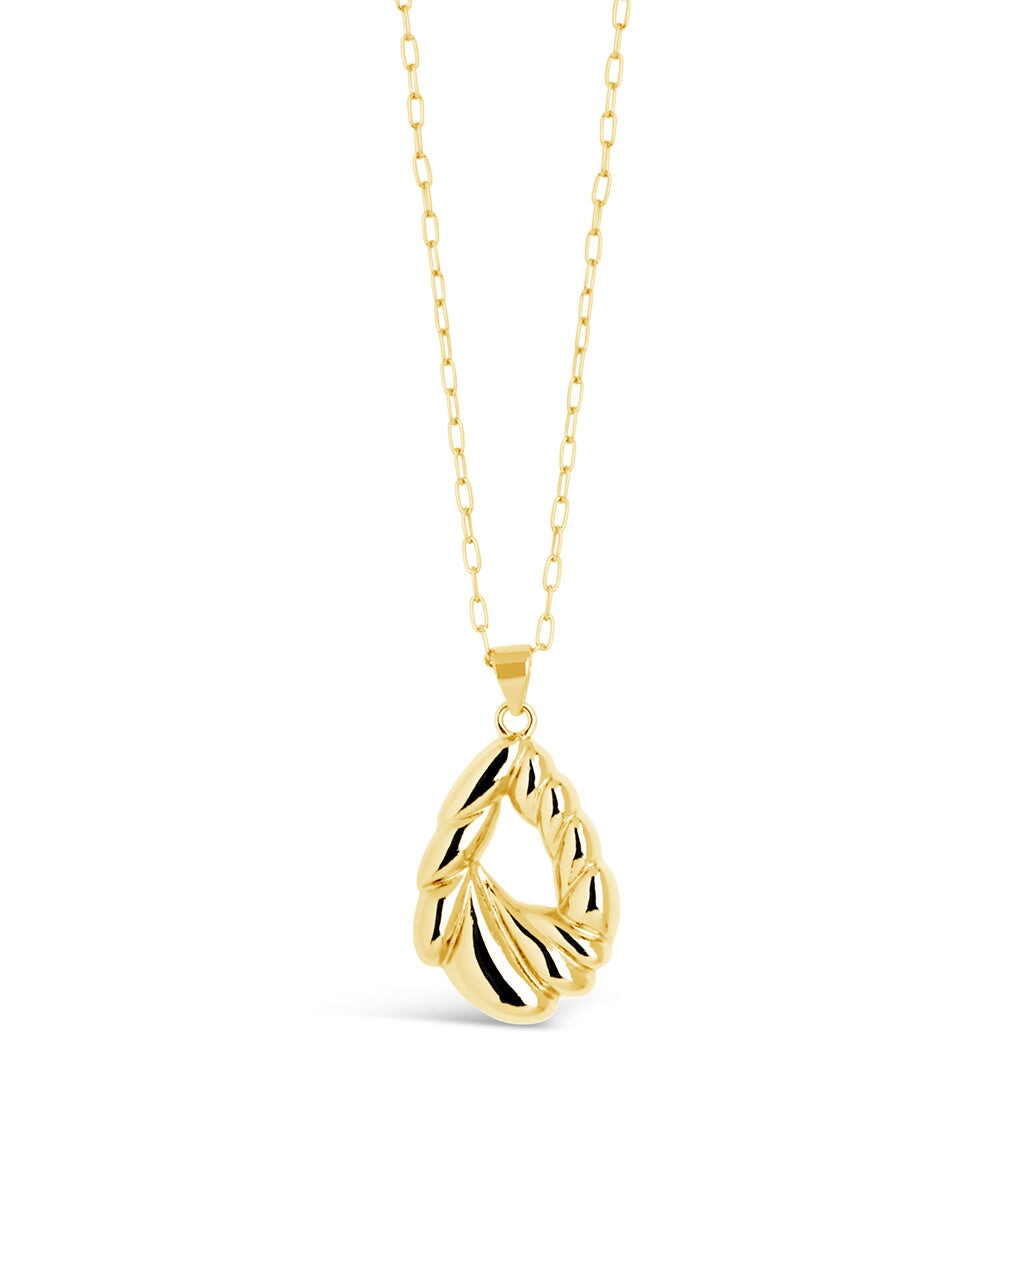 Alouette Pendant Necklace Sterling Forever Gold 